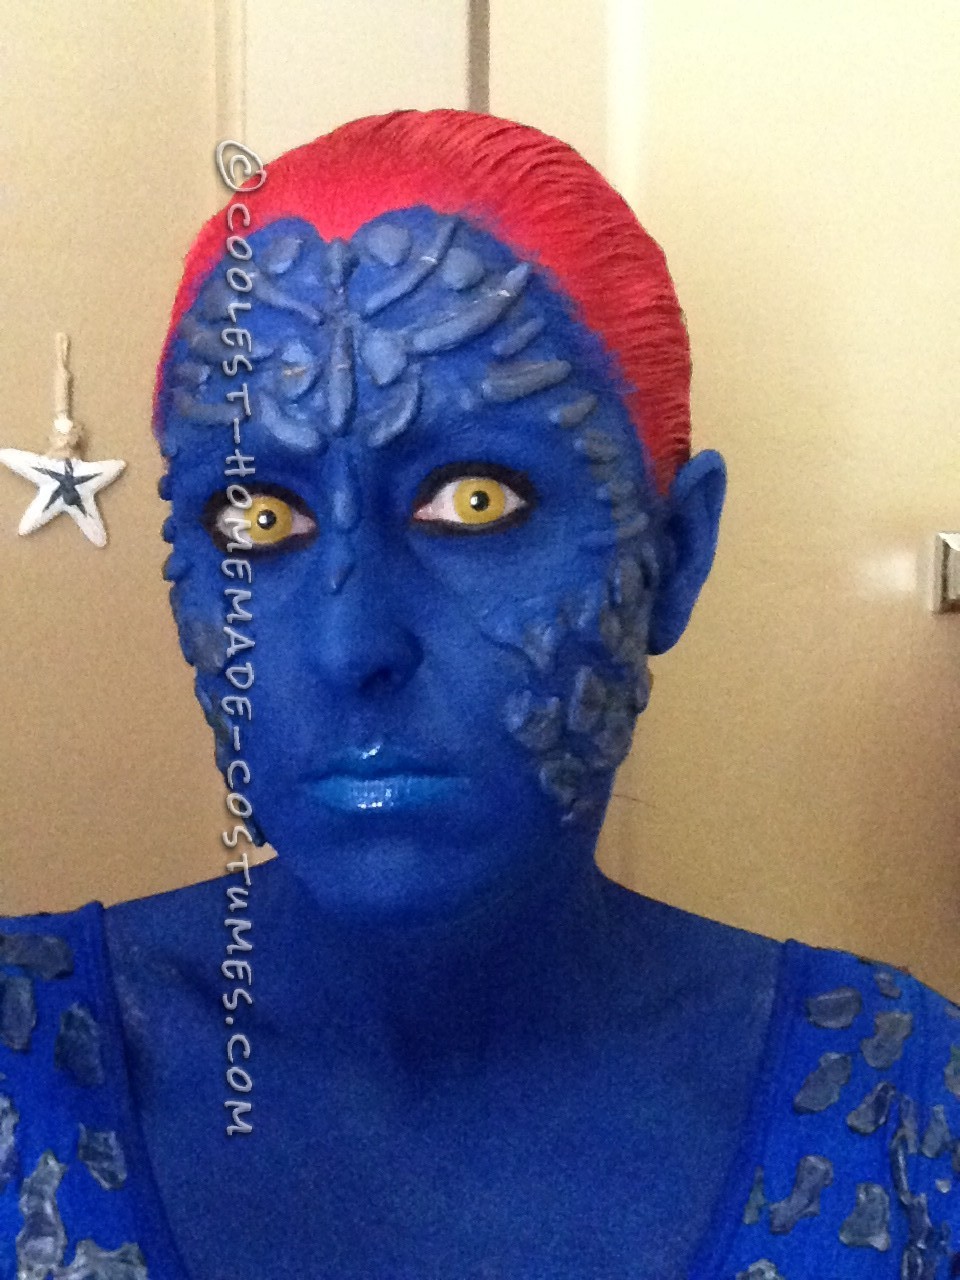 The Mystique Costume That I Spent 4 Months Planning For!